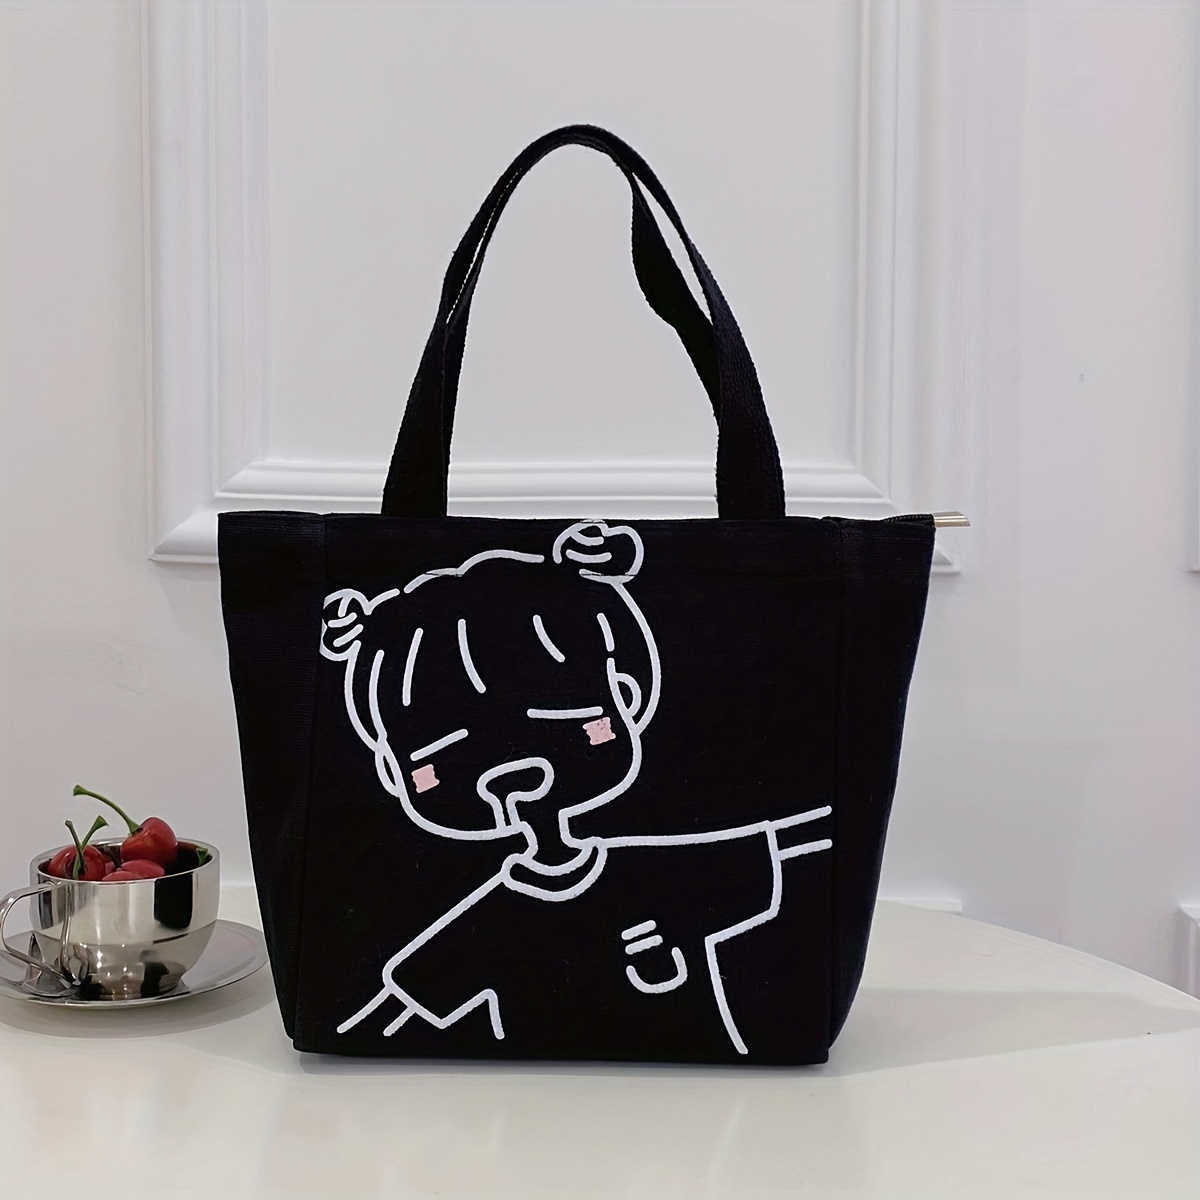 Fashionable Tote Bag With Character Print On Canvas